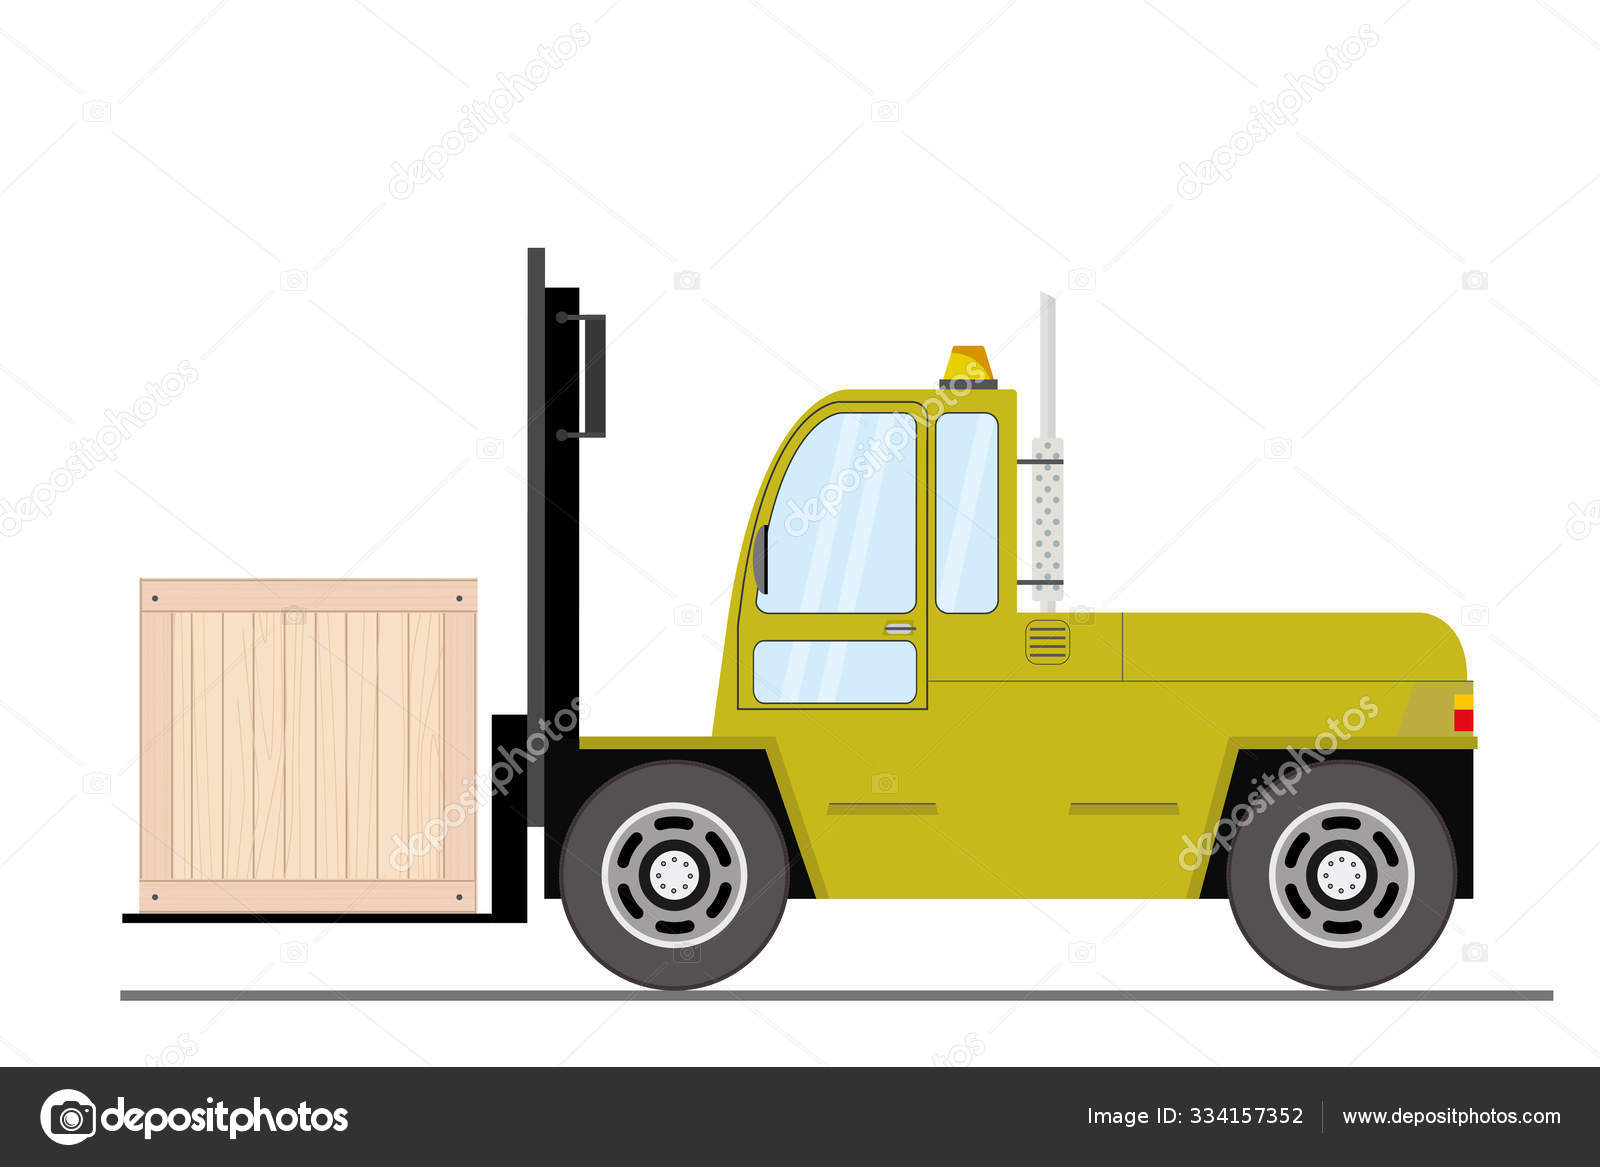 Forklift Truck With Box Side View Isolated On White Background Stock Vector C Naum100 334157352